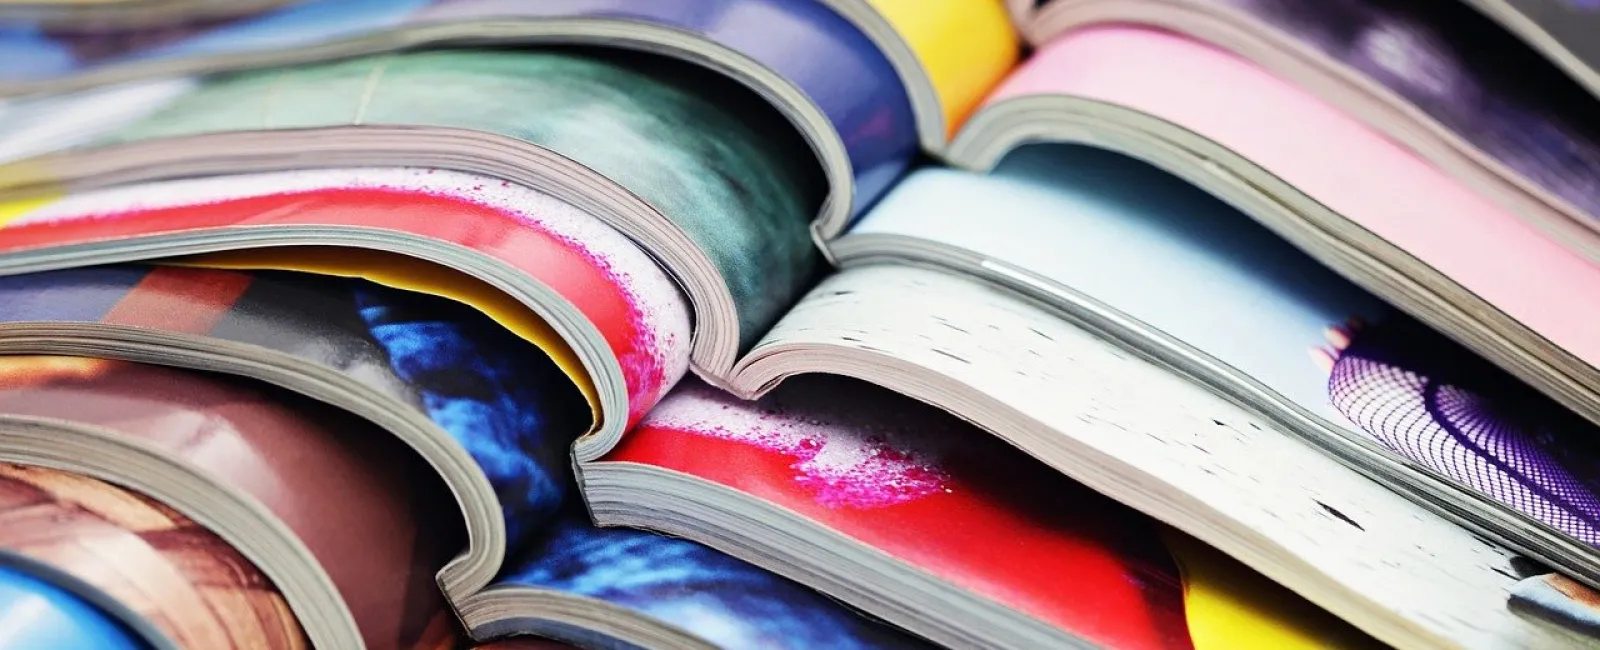 7 Reasons to Use Print Media in Your Advertising Campaigns